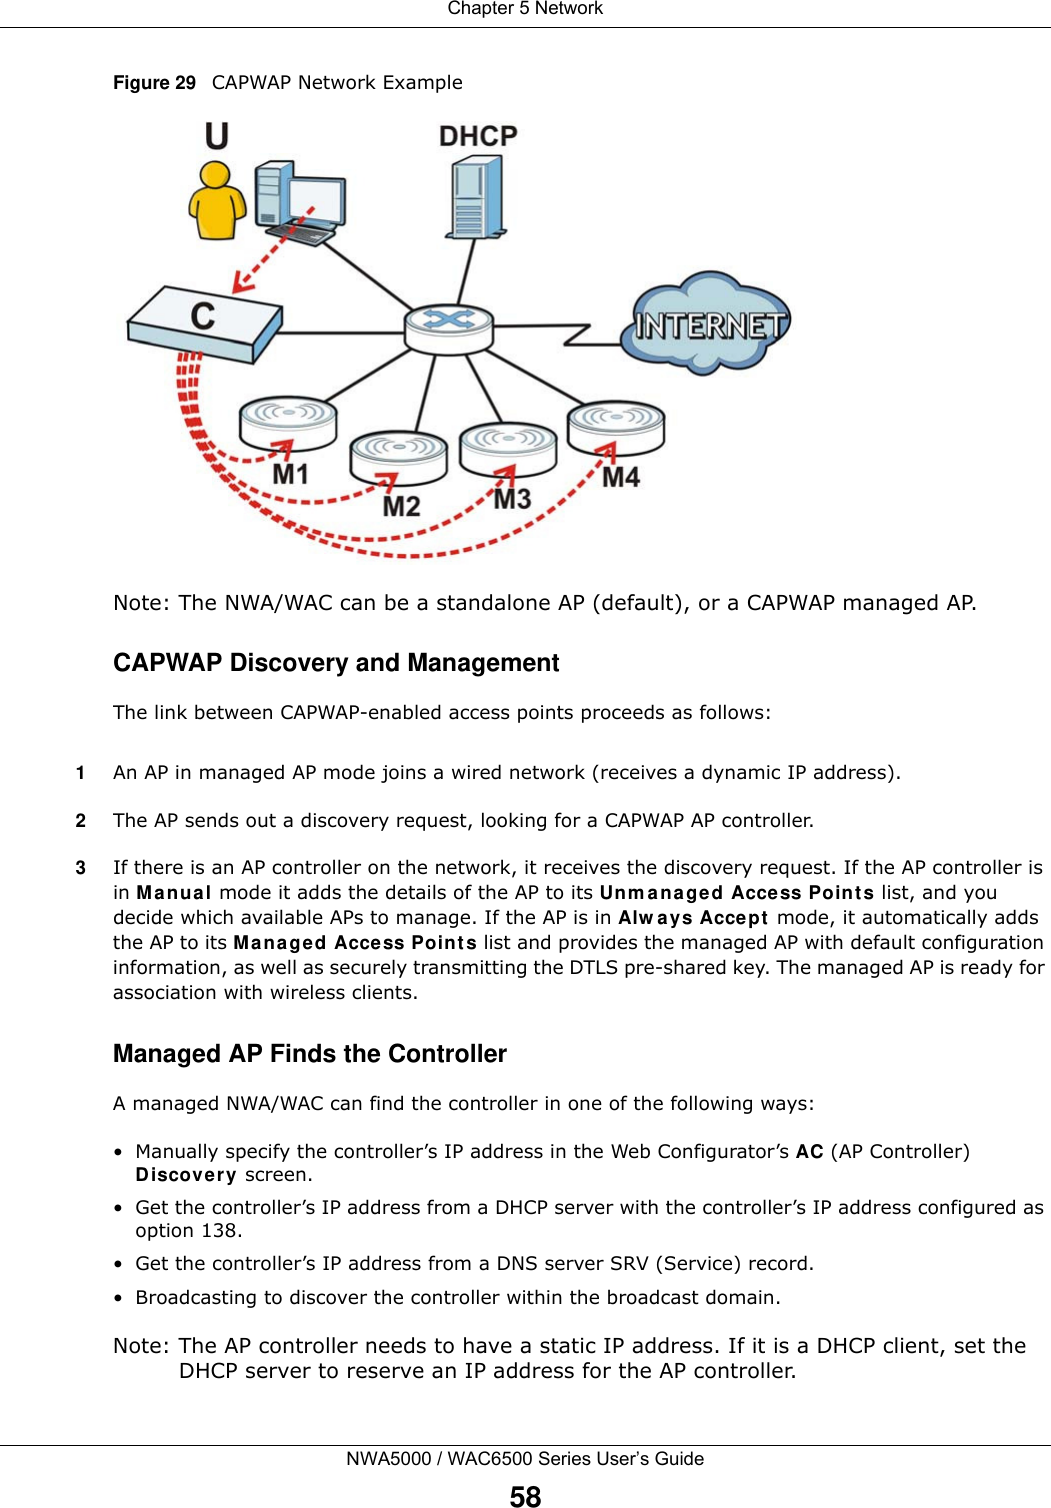 Chapter 5 NetworkNWA5000 / WAC6500 Series User’s Guide58Figure 29   CAPWAP Network ExampleNote: The NWA/WAC can be a standalone AP (default), or a CAPWAP managed AP.CAPWAP Discovery and ManagementThe link between CAPWAP-enabled access points proceeds as follows:1An AP in managed AP mode joins a wired network (receives a dynamic IP address).2The AP sends out a discovery request, looking for a CAPWAP AP controller.3If there is an AP controller on the network, it receives the discovery request. If the AP controller is in Ma nua l mode it adds the details of the AP to its Unm a na ged Access Poin ts list, and you decide which available APs to manage. If the AP is in Alw a ys Accept  mode, it automatically adds the AP to its Ma nage d Access Points list and provides the managed AP with default configuration information, as well as securely transmitting the DTLS pre-shared key. The managed AP is ready for association with wireless clients.Managed AP Finds the ControllerA managed NWA/WAC can find the controller in one of the following ways:• Manually specify the controller’s IP address in the Web Configurator’s AC (AP Controller) Discover y screen. • Get the controller’s IP address from a DHCP server with the controller’s IP address configured as option 138.• Get the controller’s IP address from a DNS server SRV (Service) record.• Broadcasting to discover the controller within the broadcast domain.Note: The AP controller needs to have a static IP address. If it is a DHCP client, set the DHCP server to reserve an IP address for the AP controller.